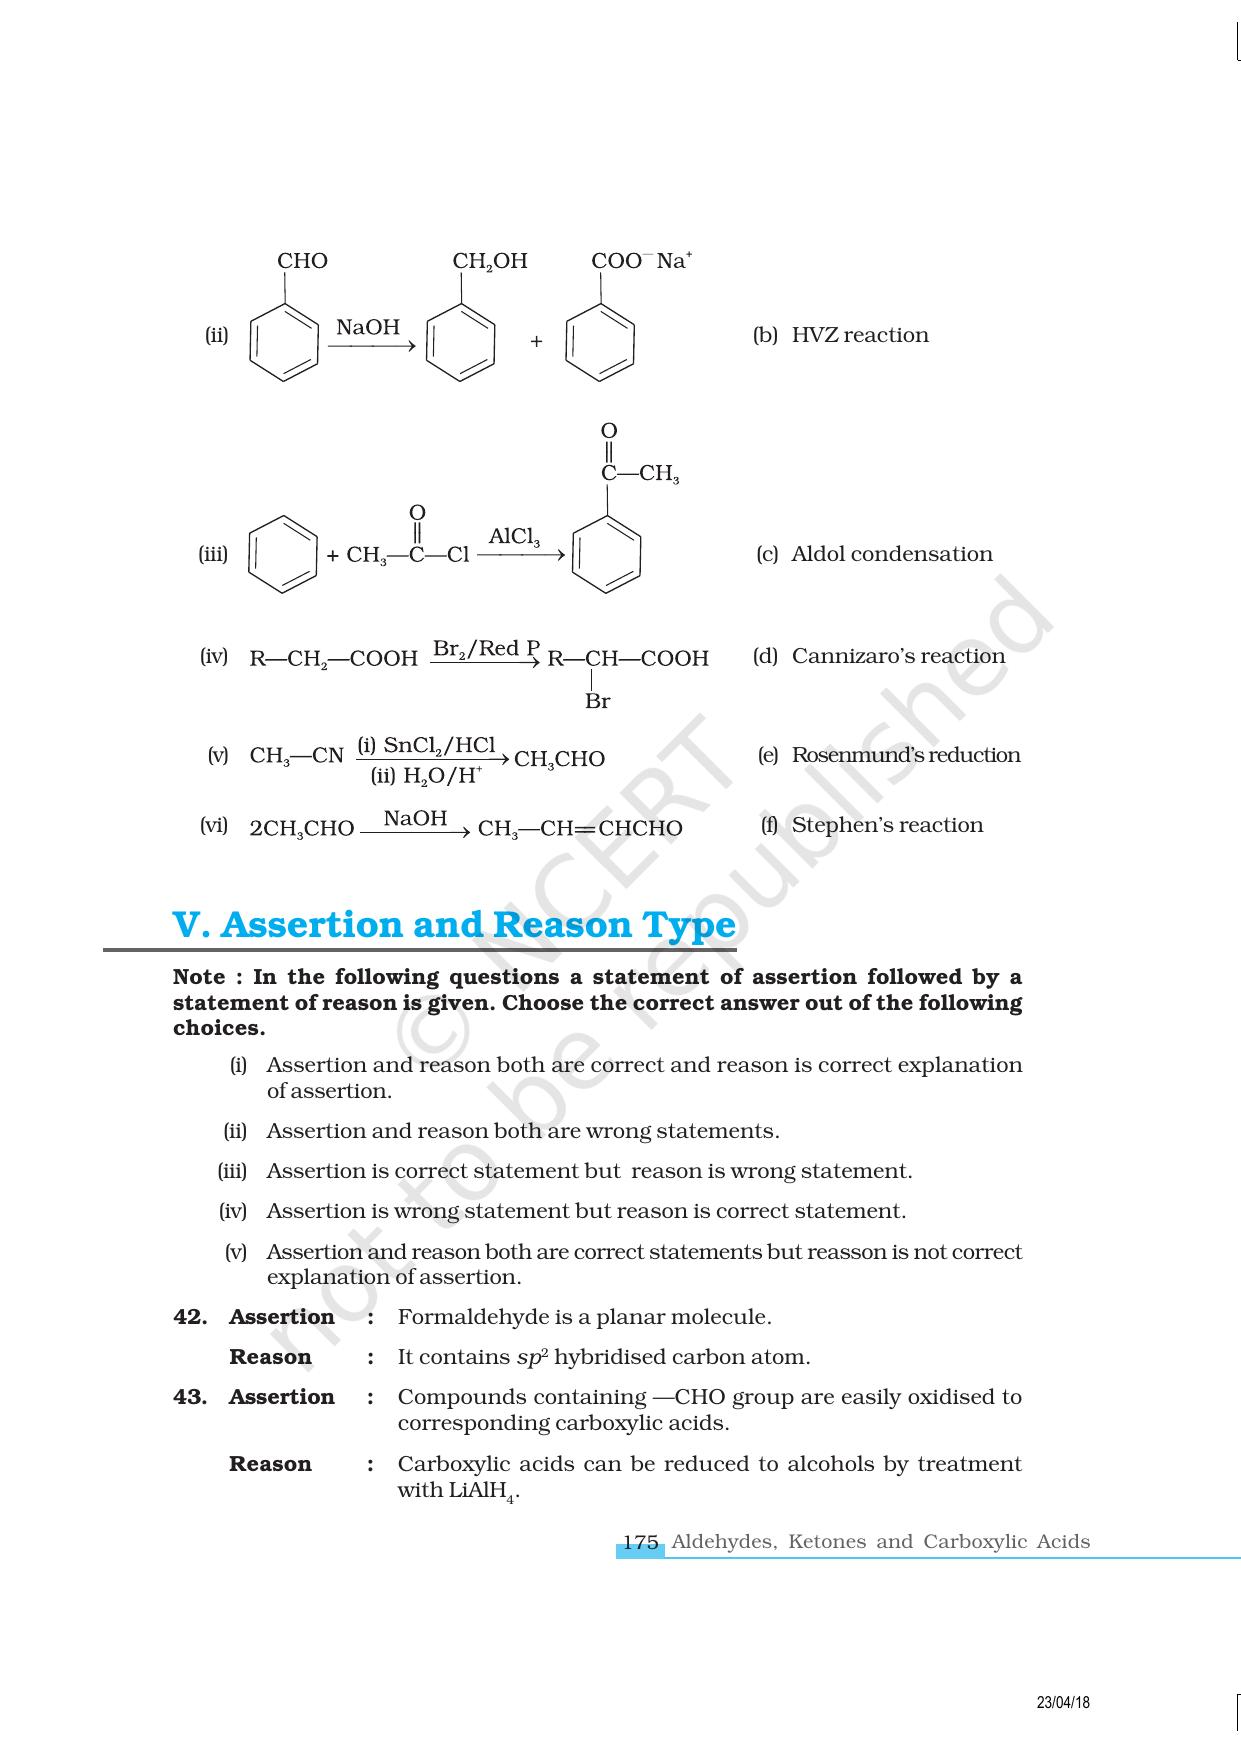 NCERT Exemplar Book for Class 12 Chemistry: Chapter 12 Aldehydes, Ketones and Carboxylic Acids - Page 8